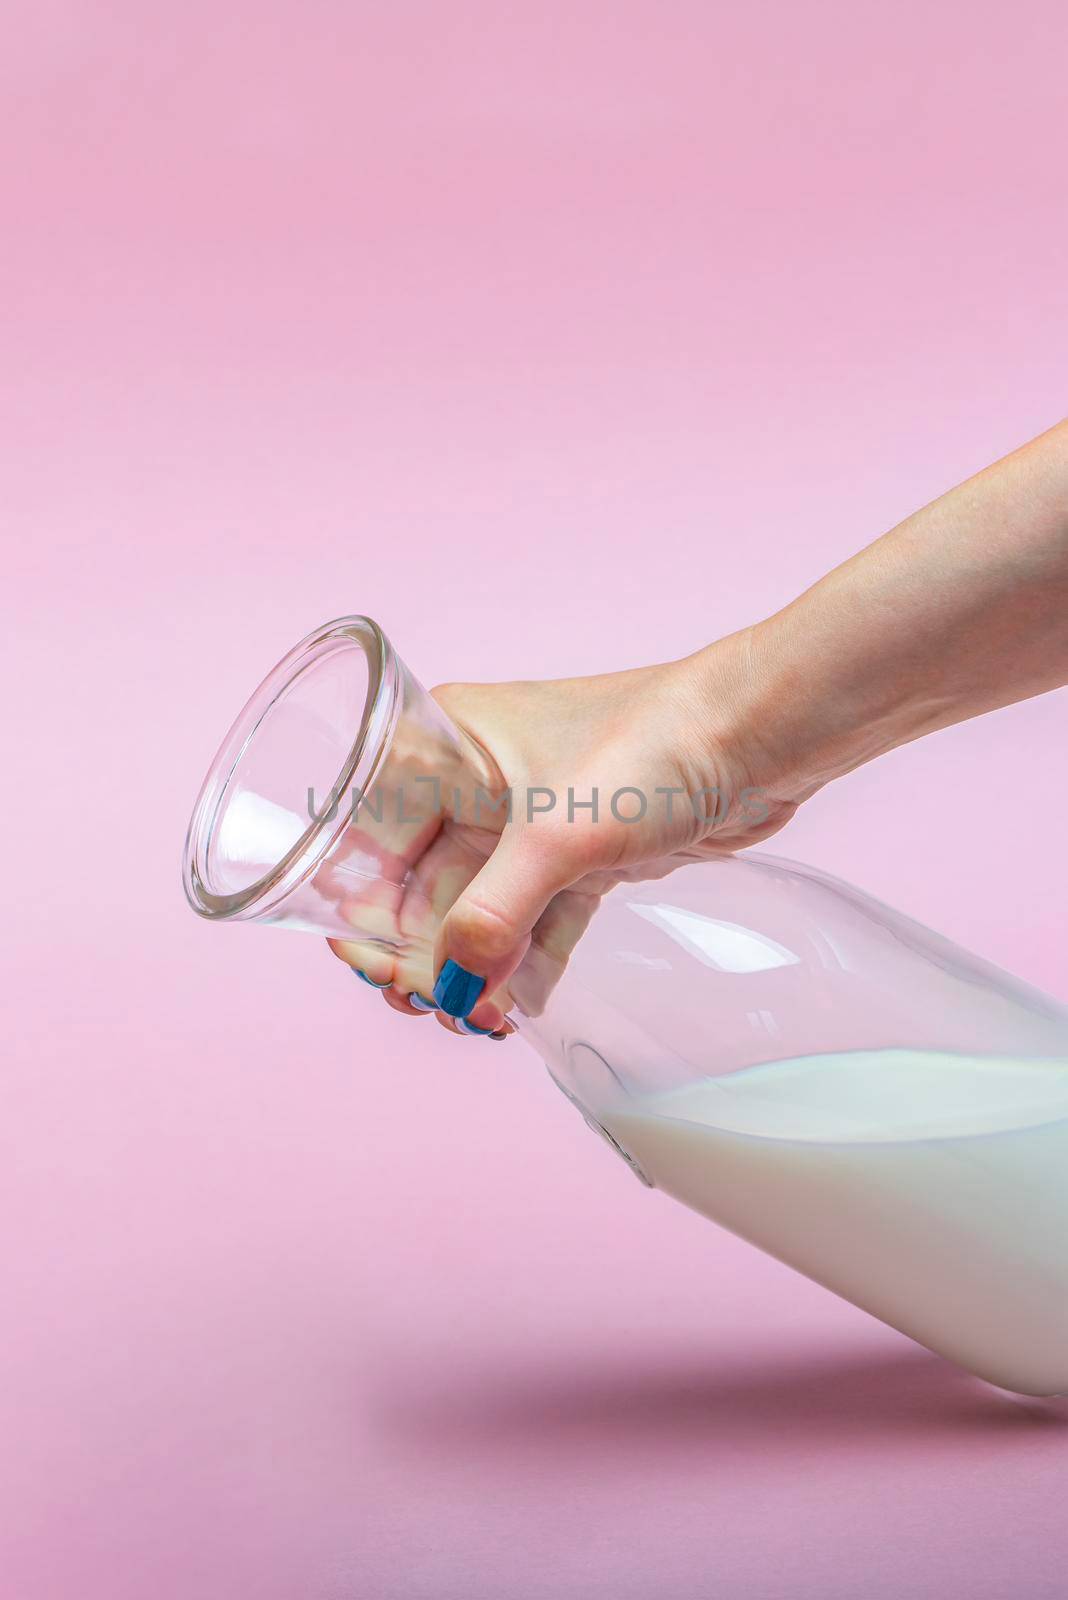 A jug of milk on a pink background in a woman's hand. Milk in a glass bottle. Space for text, large banner